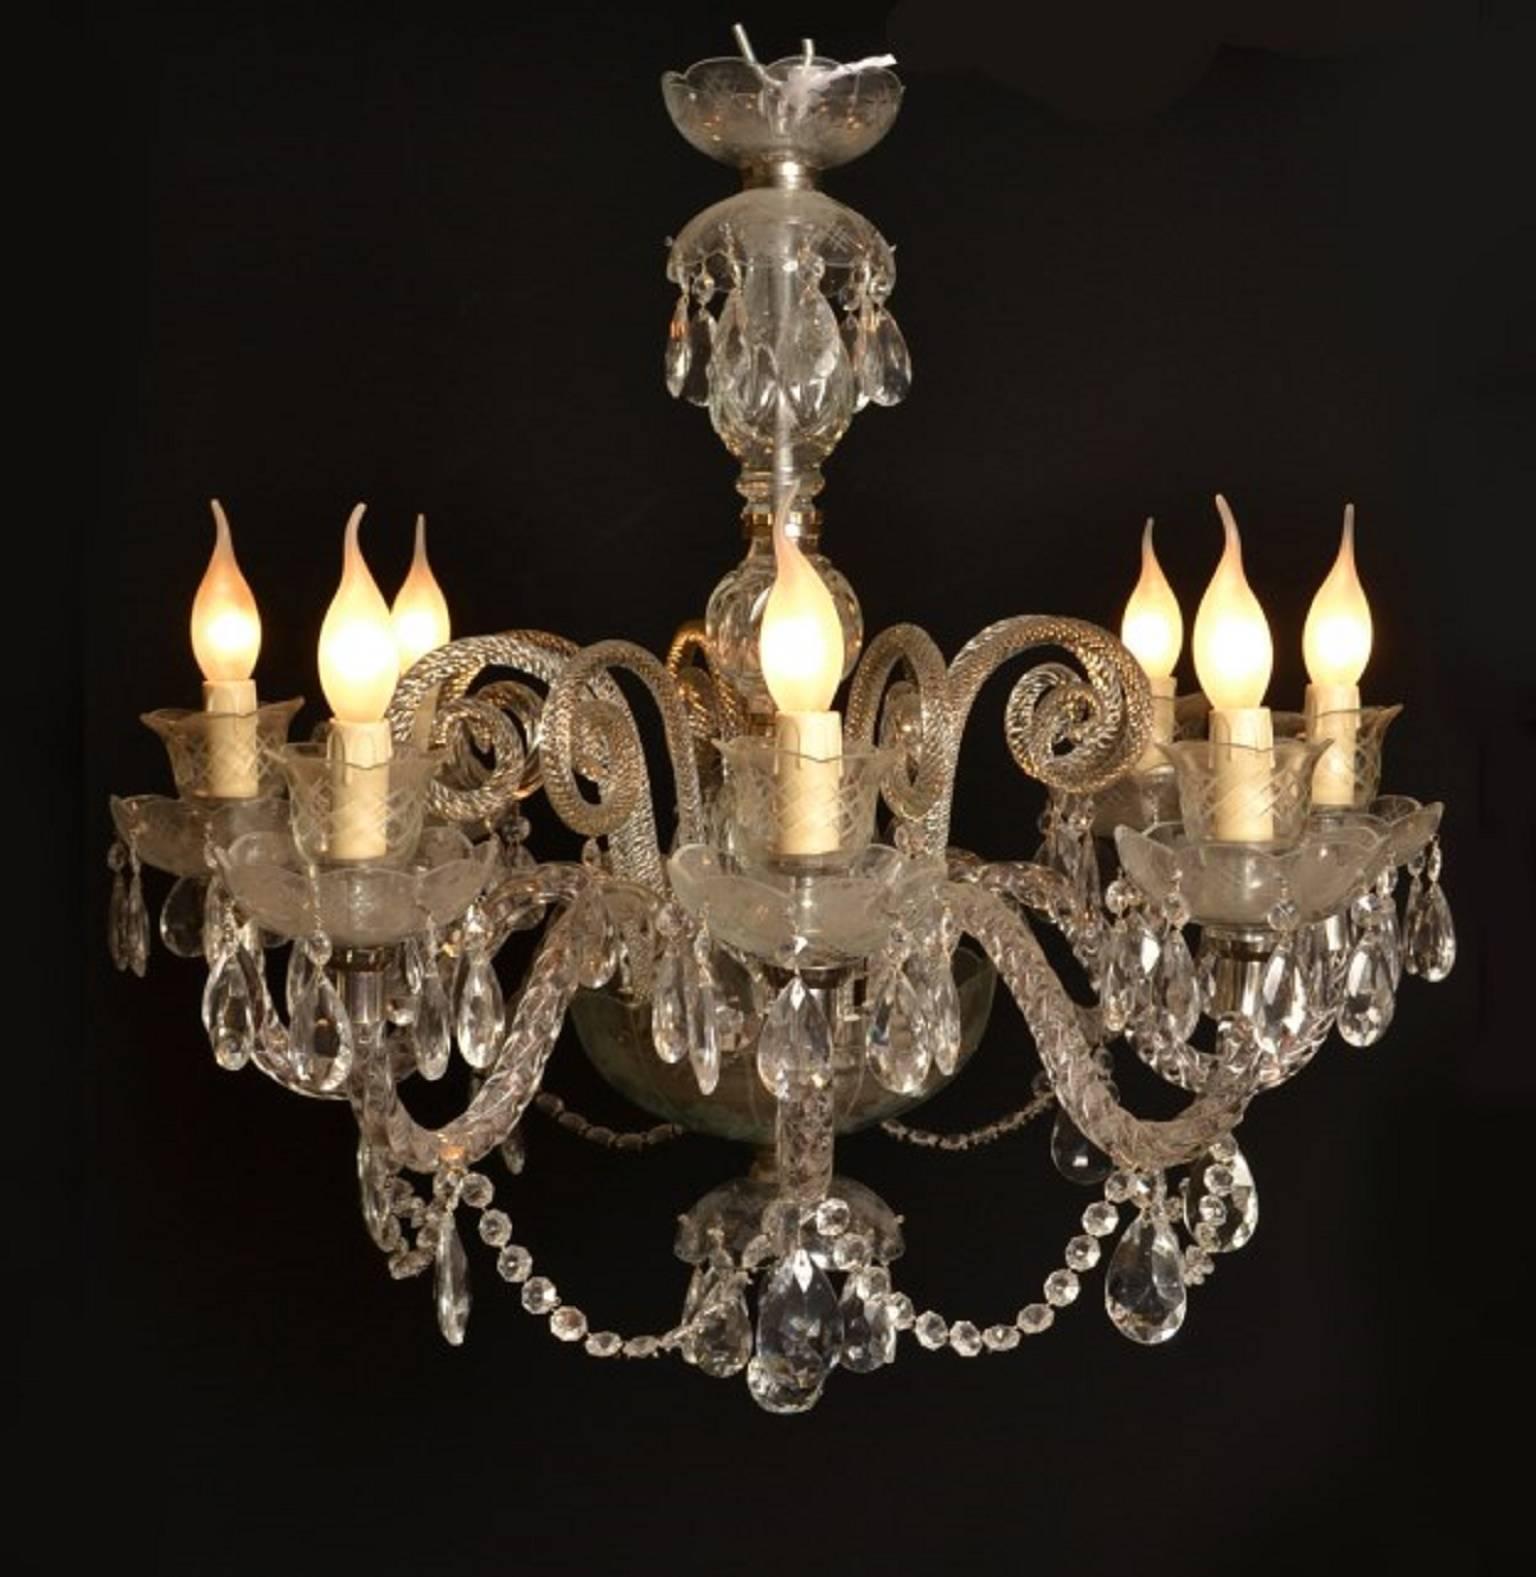 This is a lovely vintage Venetian style chandelier with eight lights and beautiful clear crystal drops, dating from the second half of the 20th Century.

Add a touch of class to your home with this beautiful chandelier.

Condition:
It is in